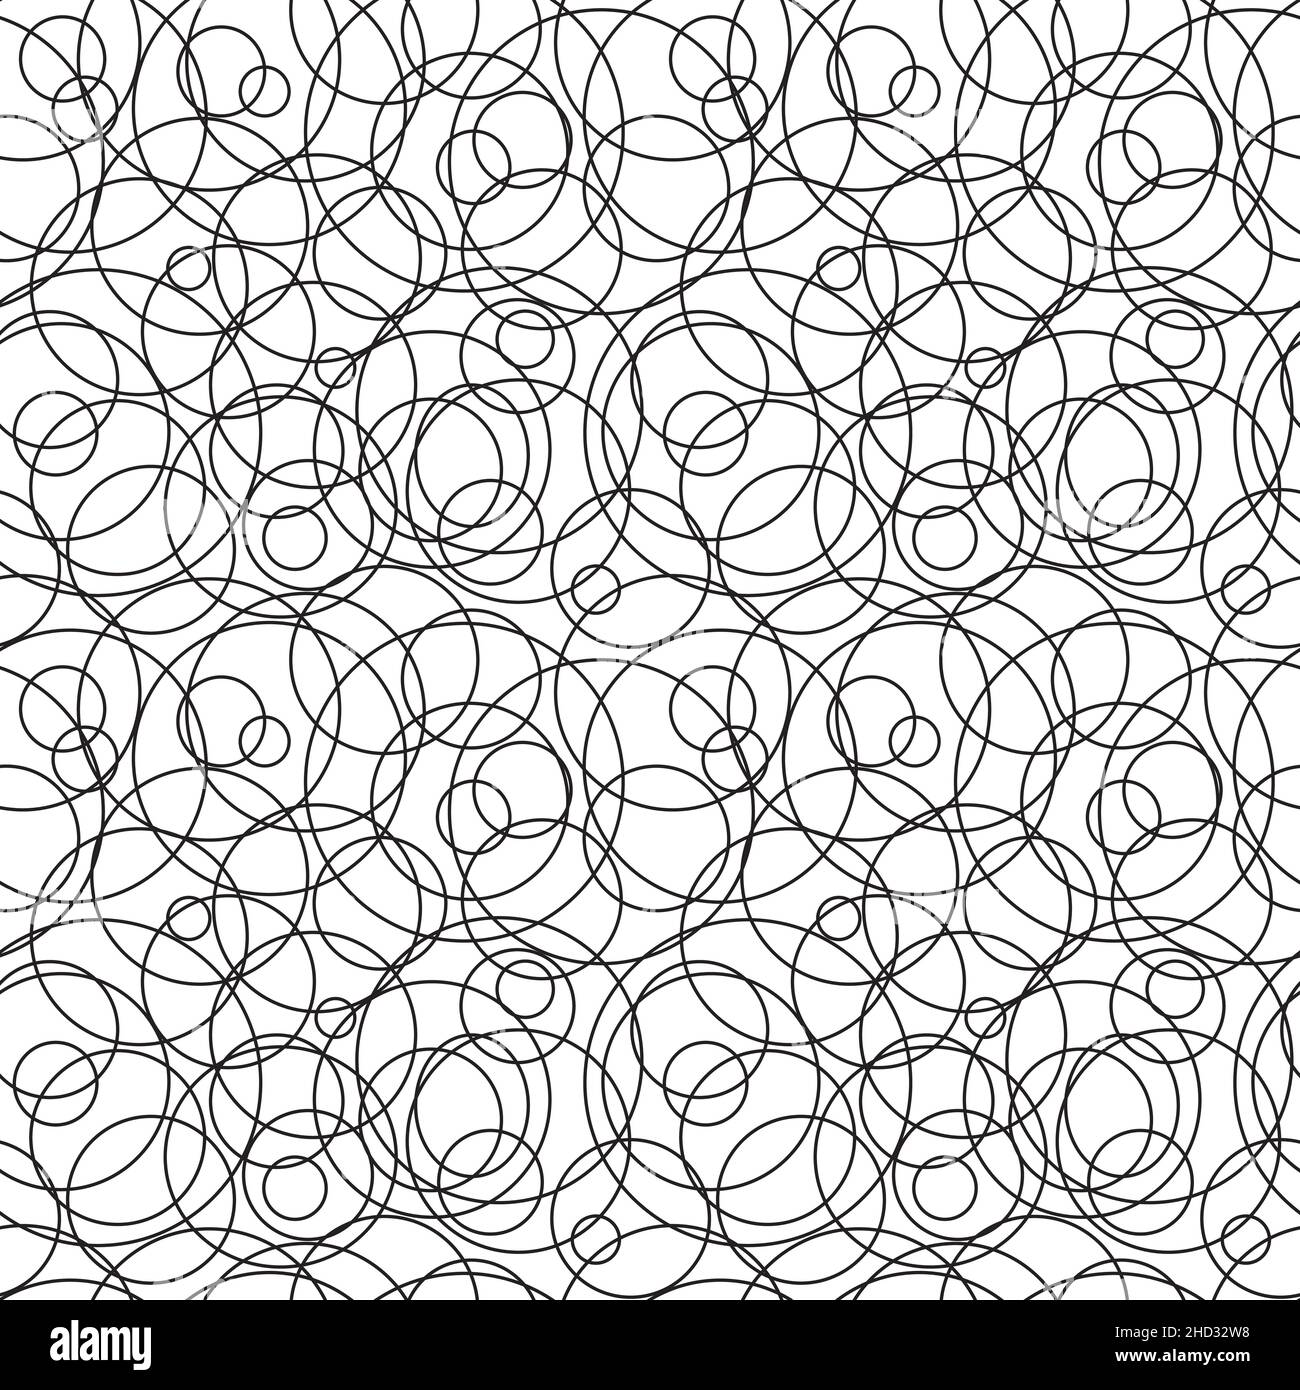 Abstract hand drawn seamless pattern, black and white messy round lines texture. Stock Vector